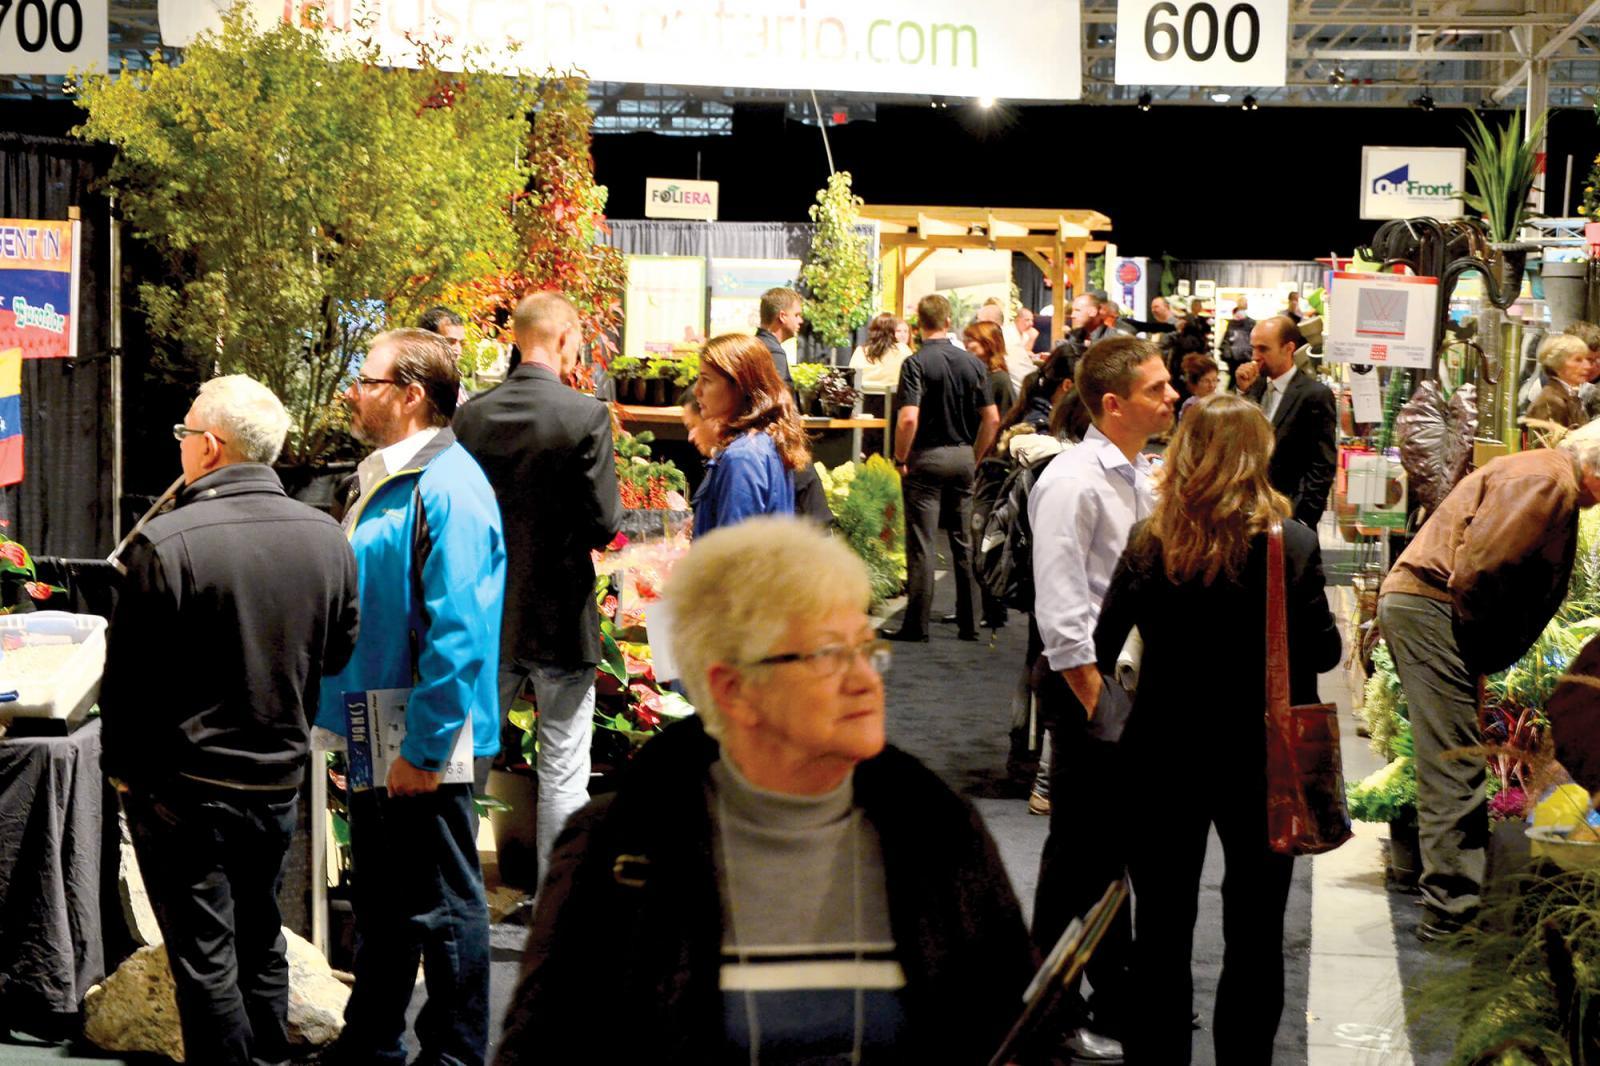 The walkways were filled during peak times on the trade show floor.